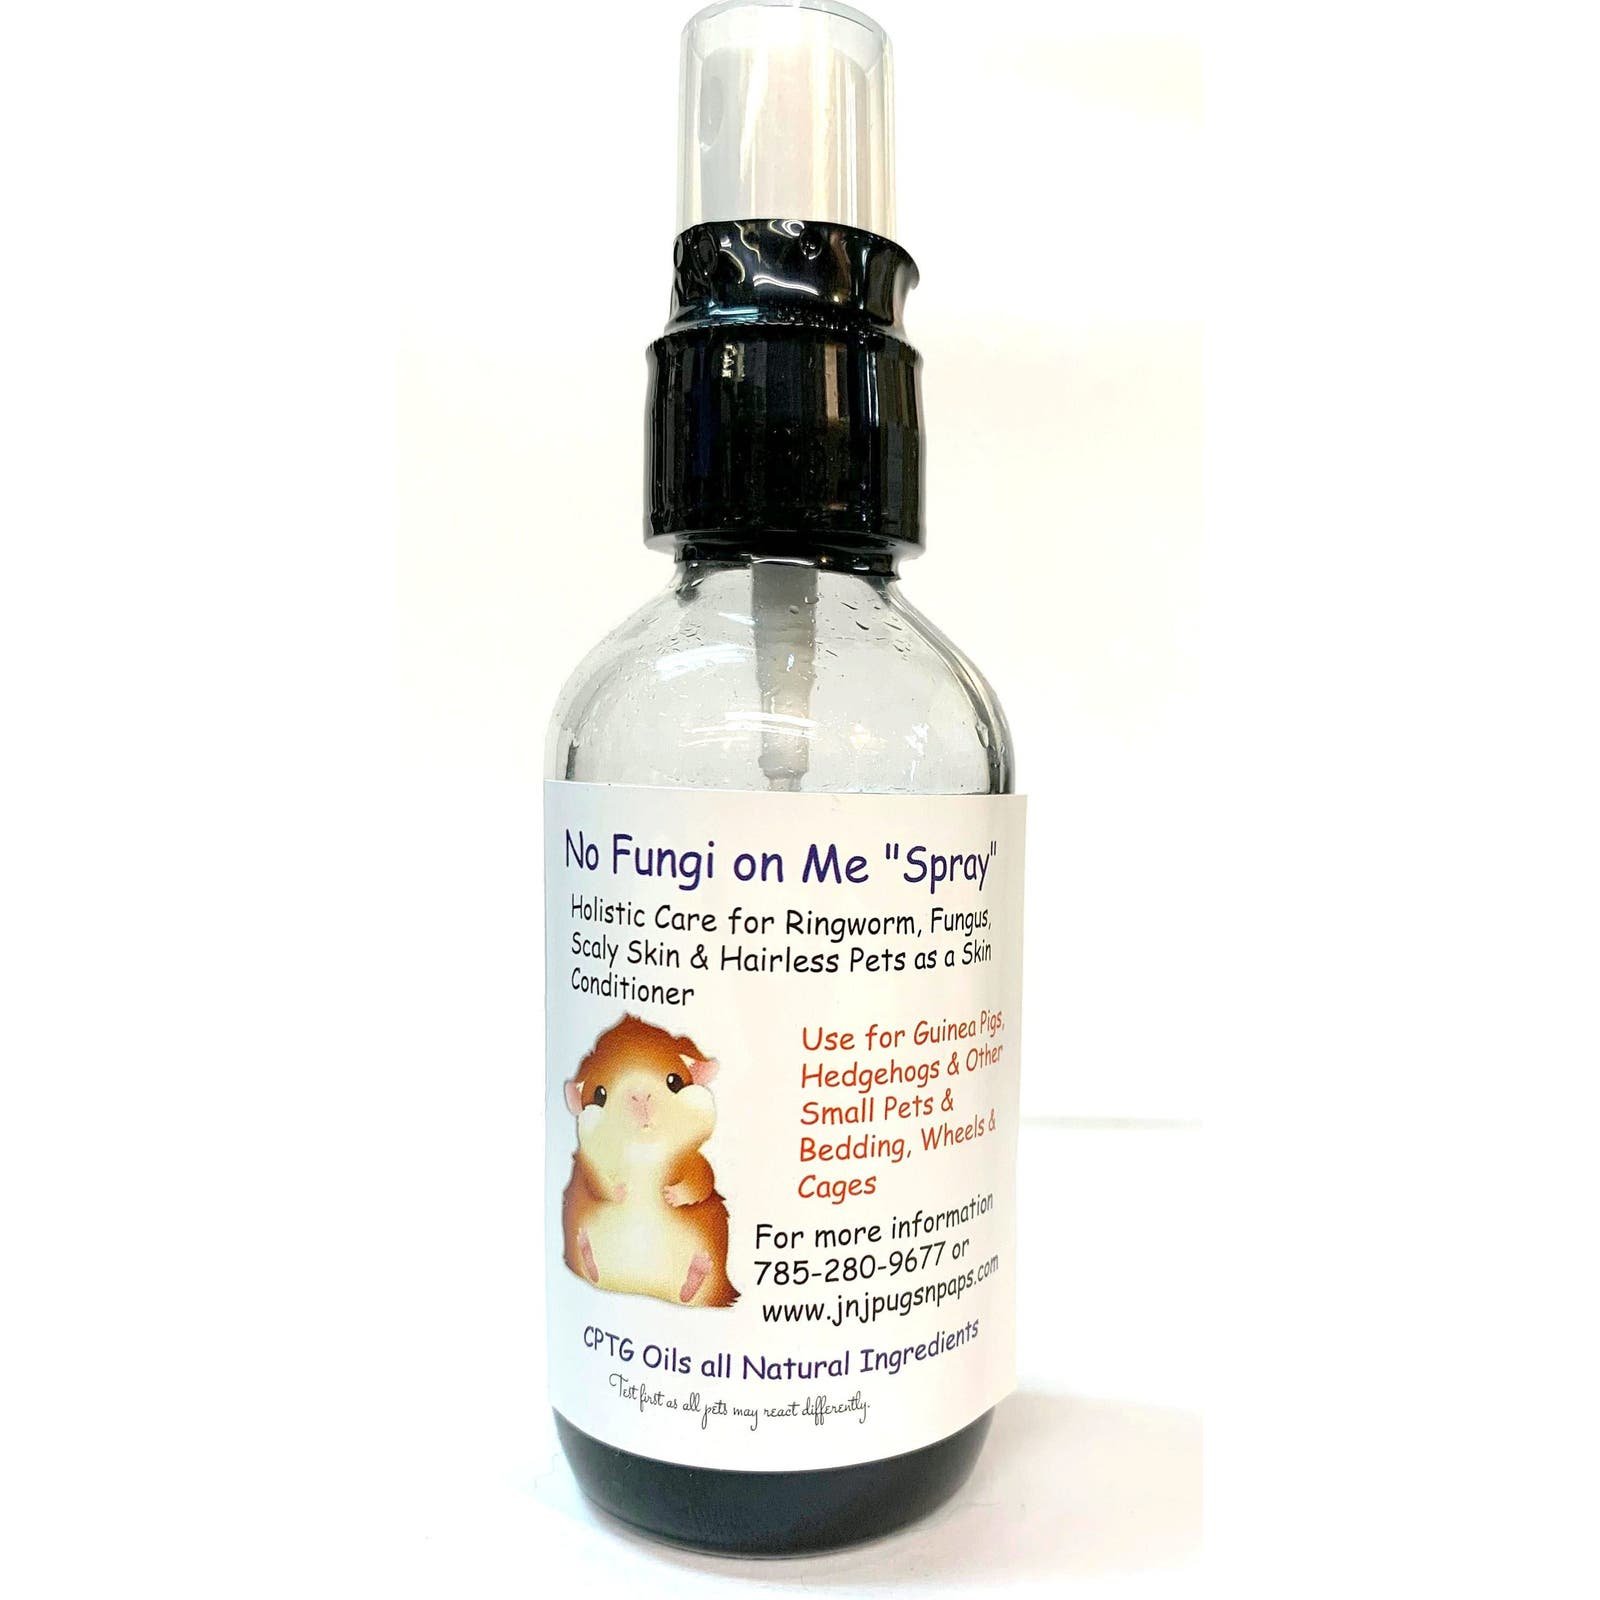 Guinea Pig & Small Animal Safe Spray for Fungus and Ringworm Relief dxvuYONlJ